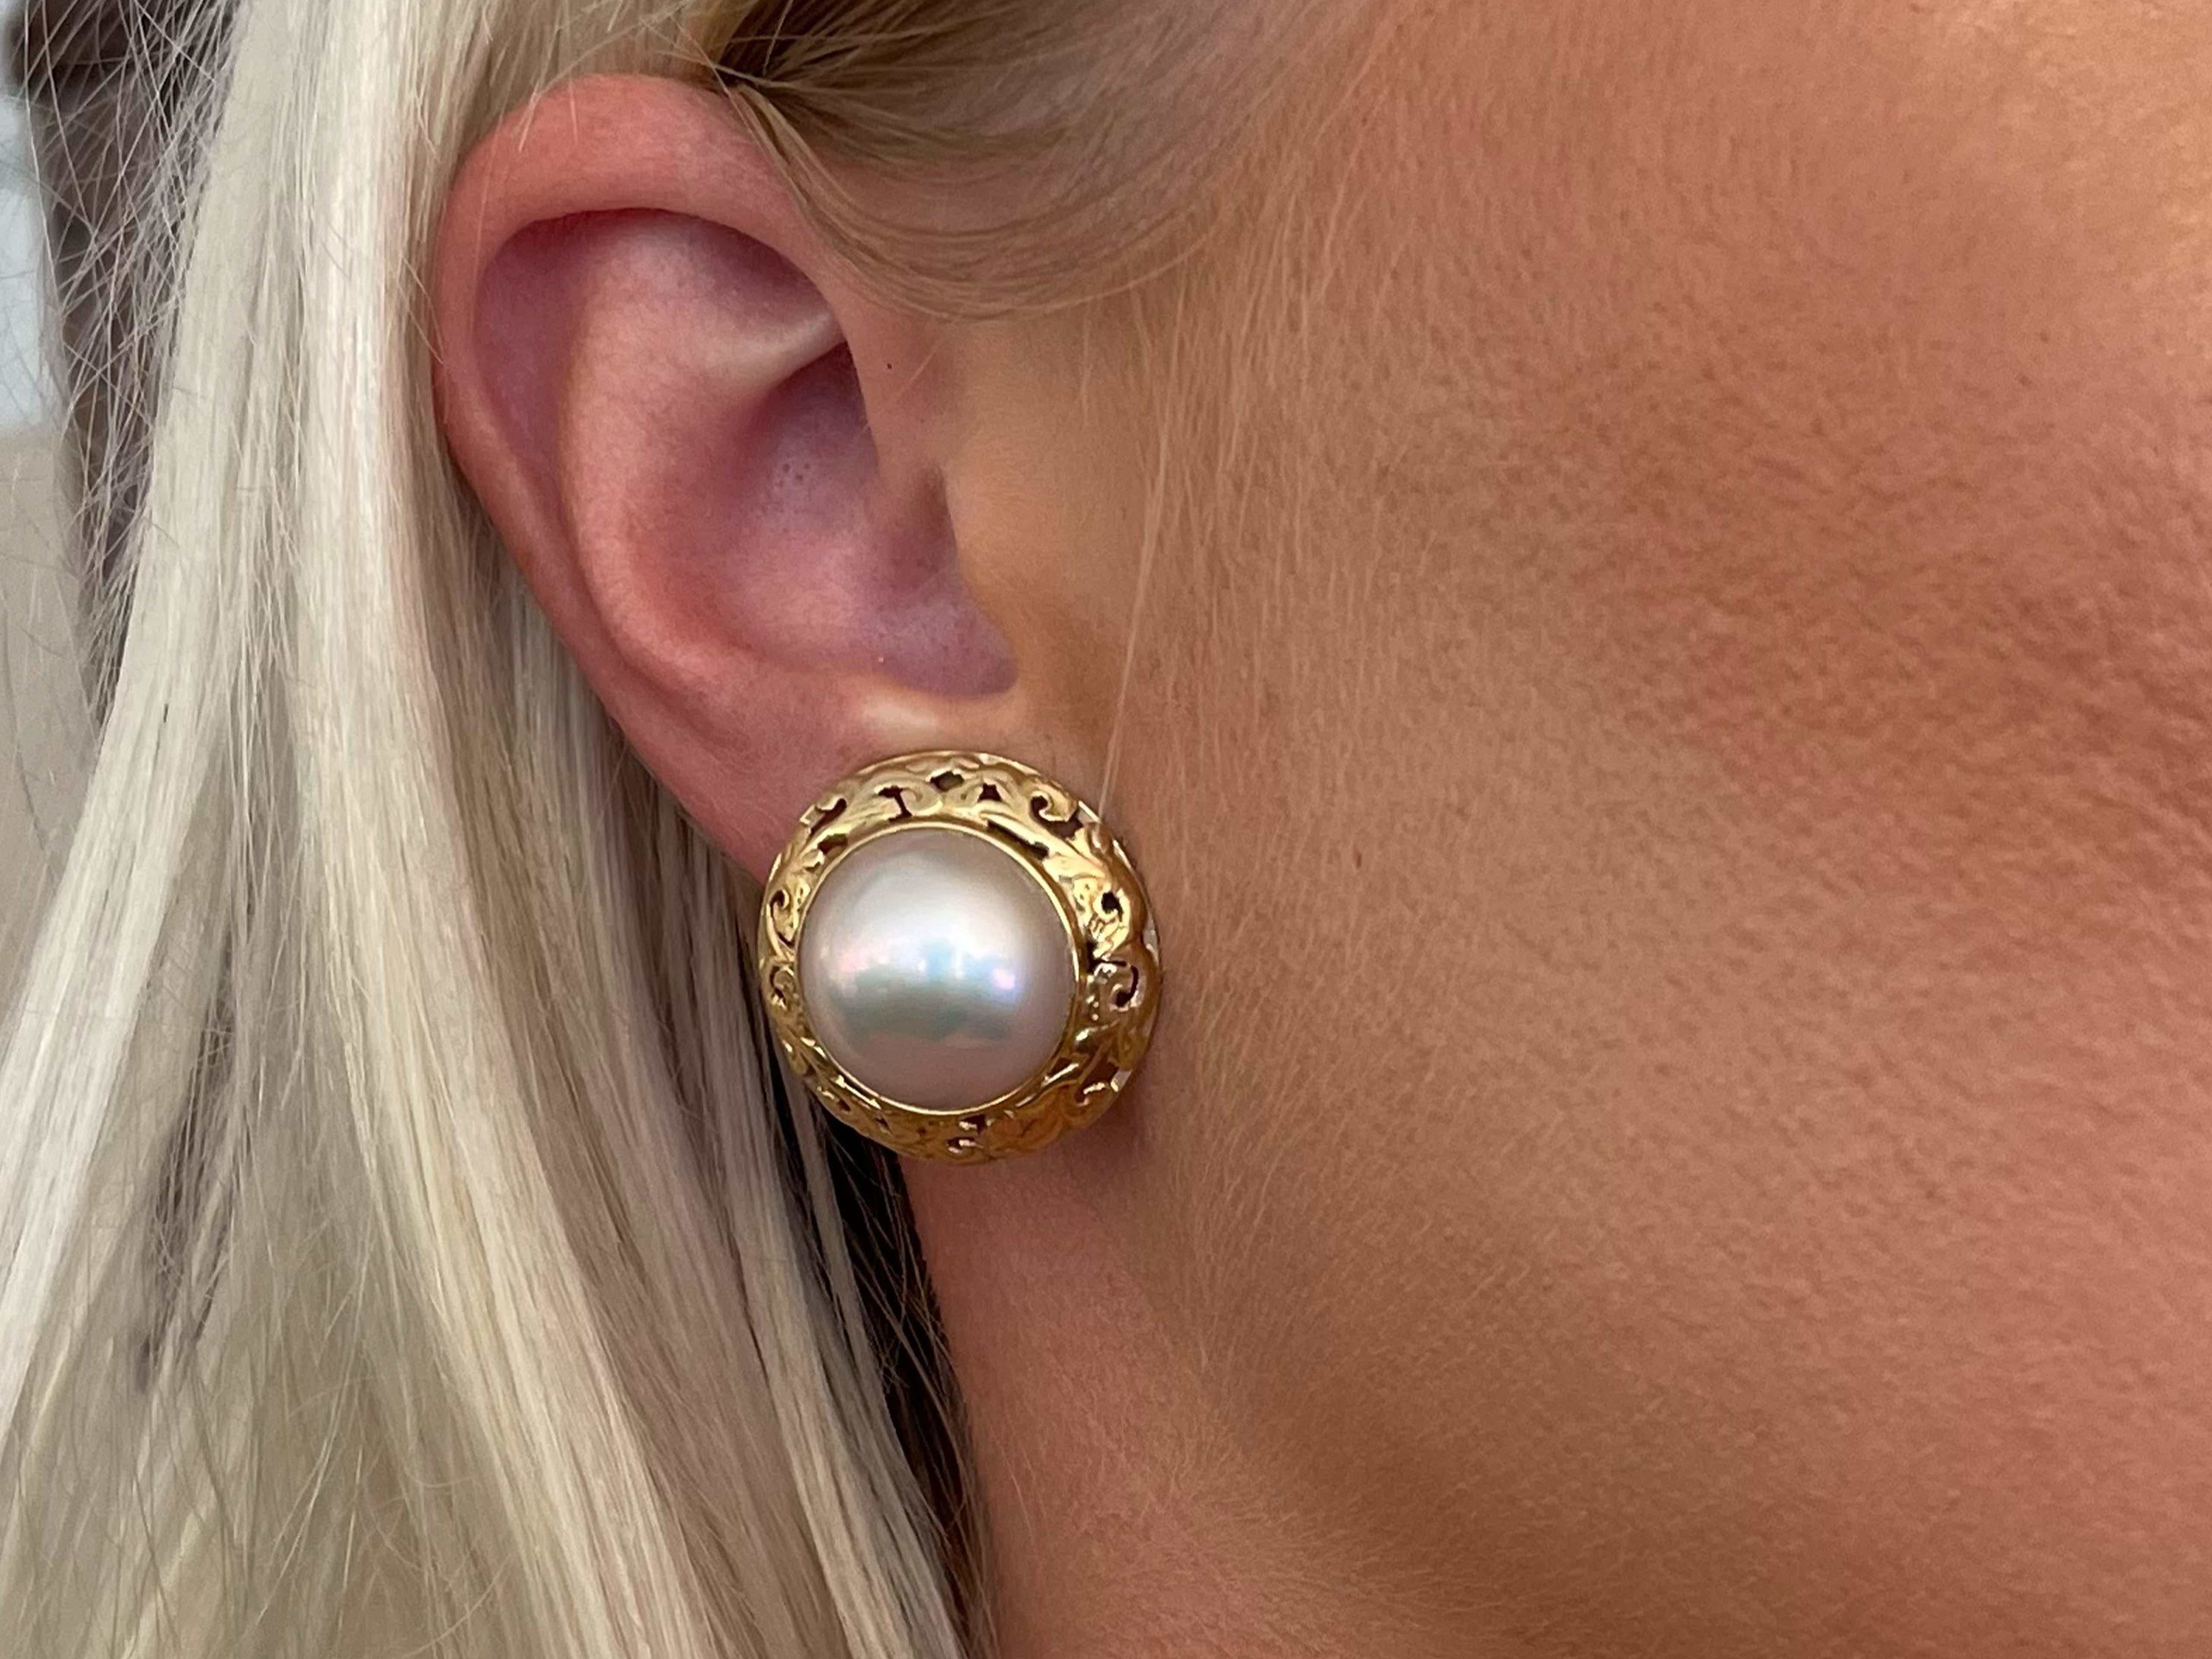 Earrings Specifications:

Designer: Ming's

Style: Large Mabe Pearl Gold Carved Bezel Earrings

Metal: 14k Yellow Gold

Total Weight: 16.3 Grams

Pearl: Mabe

Pearl Diameter: 16.50 mm

Earring Diameter: 24.34 mm

Stamped: 